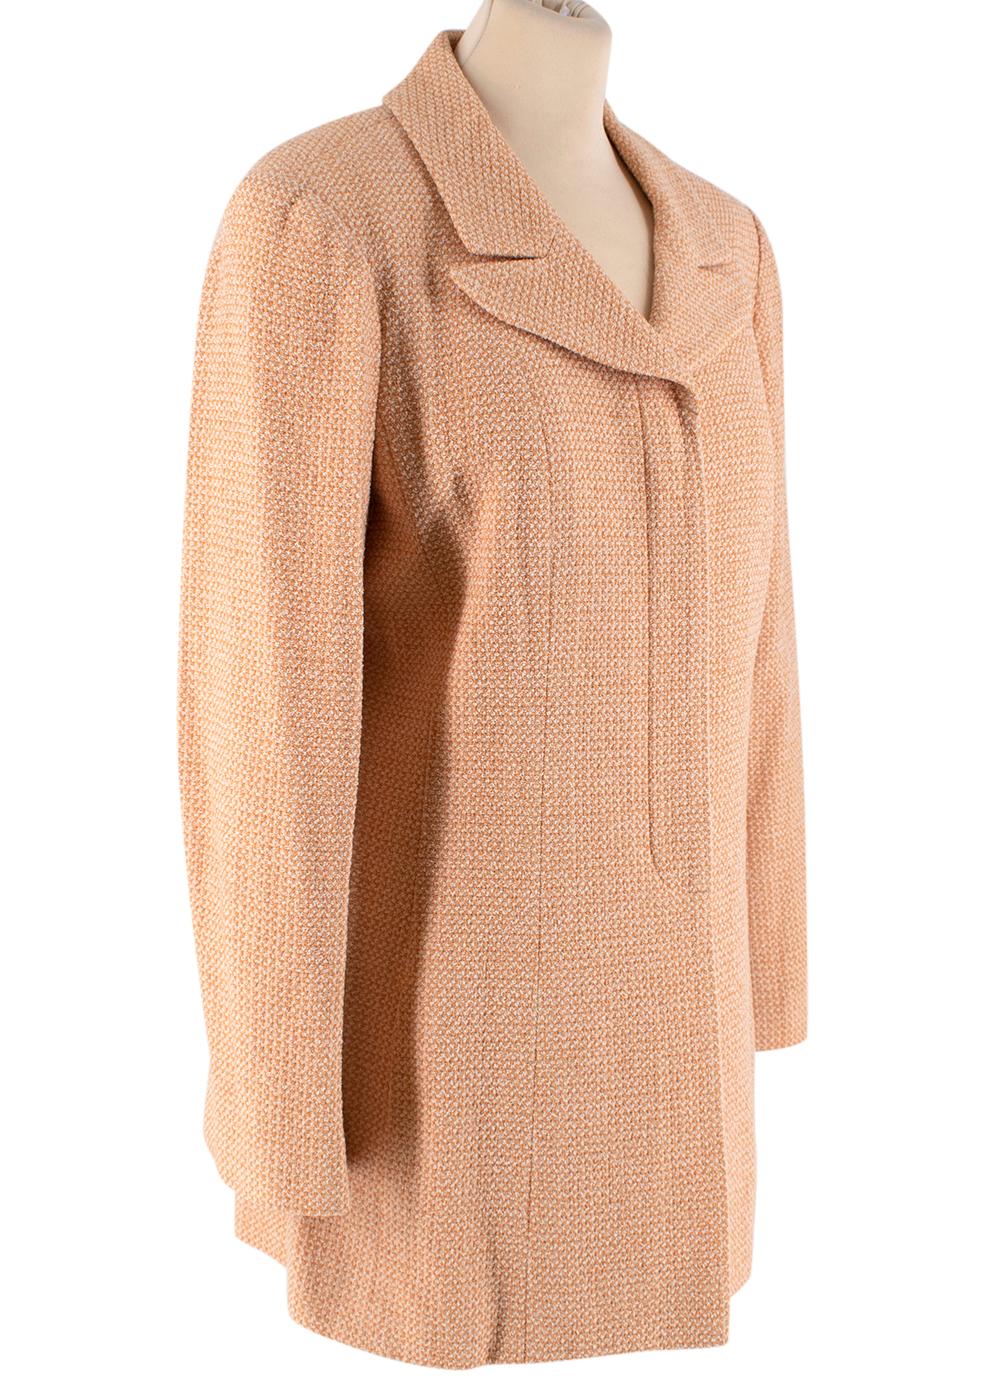 Chanel Peach Tweed Longline Jacket

- 2001 resort collection
-Classic design with peachy tones
-Four concealed buttons at the front
-Long-sleeve slit cuffs
- Large Peak Lapels
-Iconic CC gold logo embroidered on the left sleeve
-Fully lined with